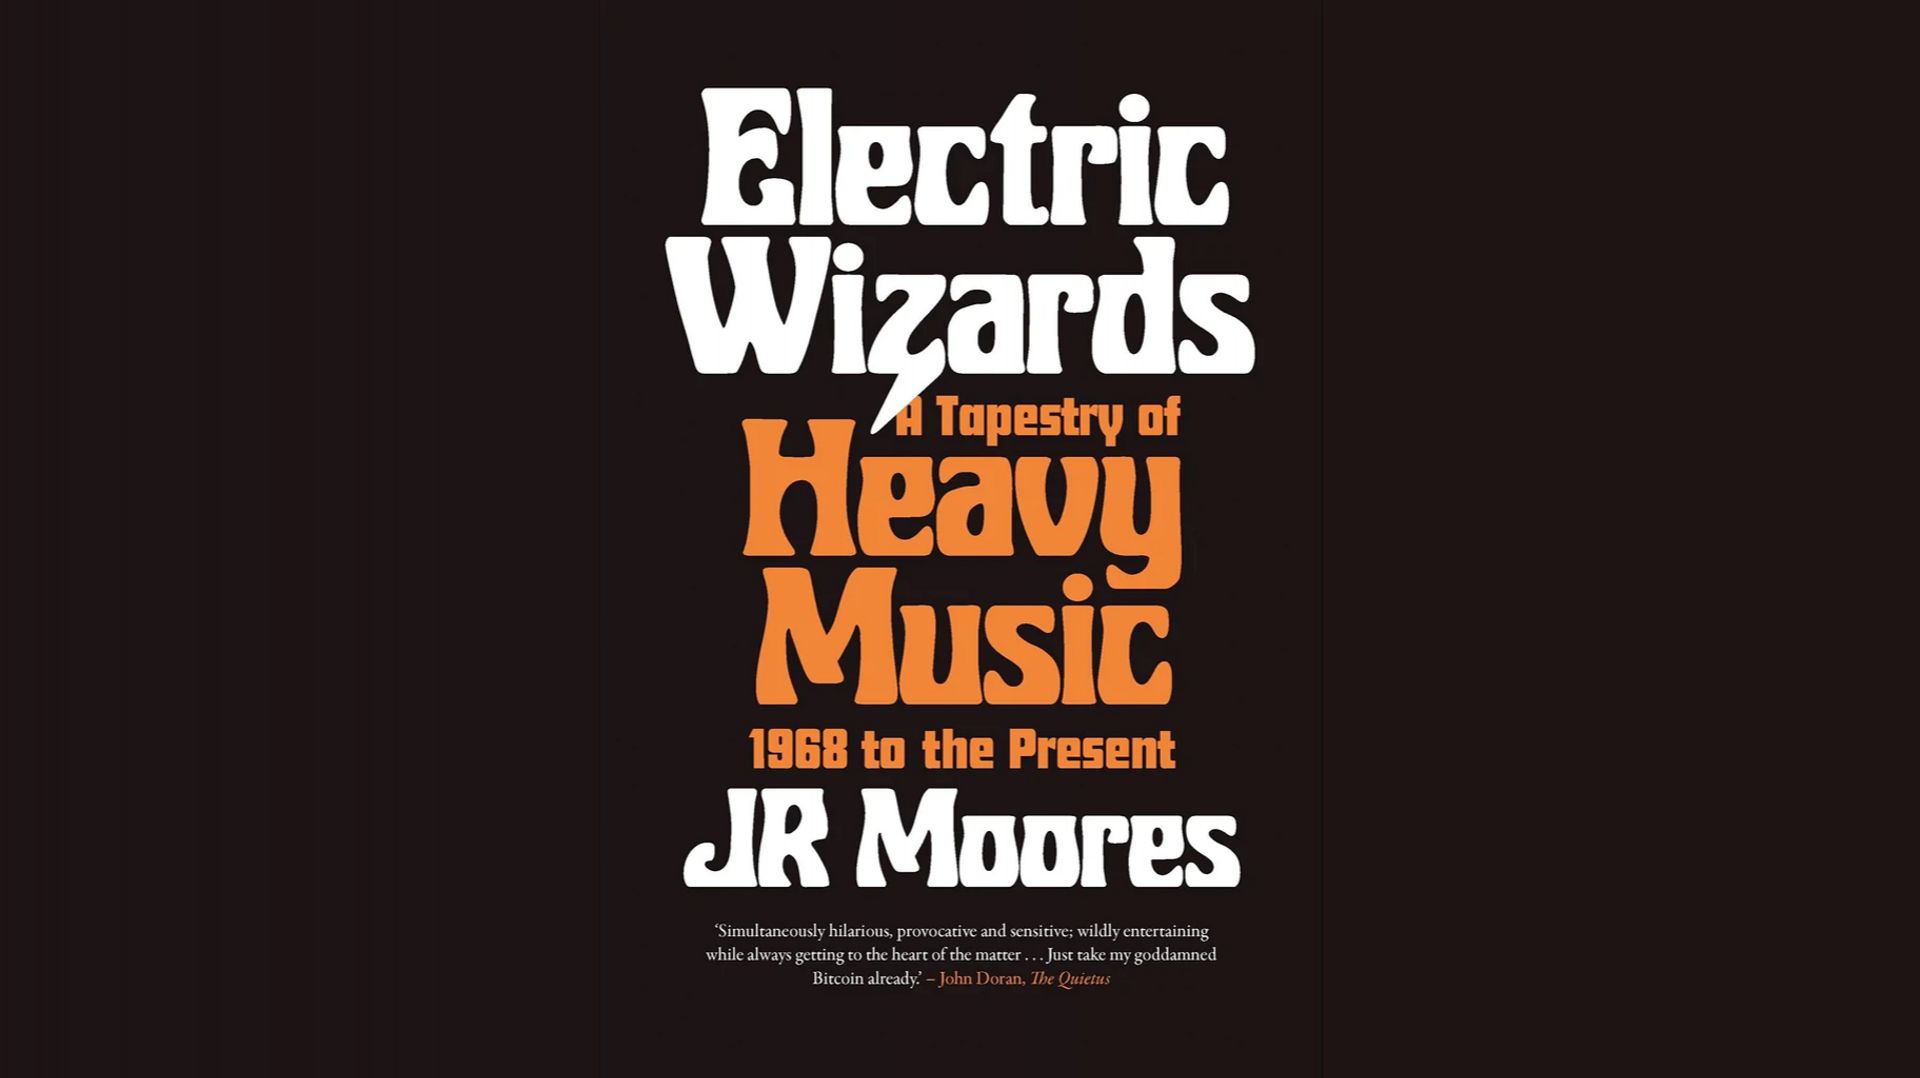 Electric Wizards : A Tapestry of Heavy Music, 1968 to the Present by J.R. Moores